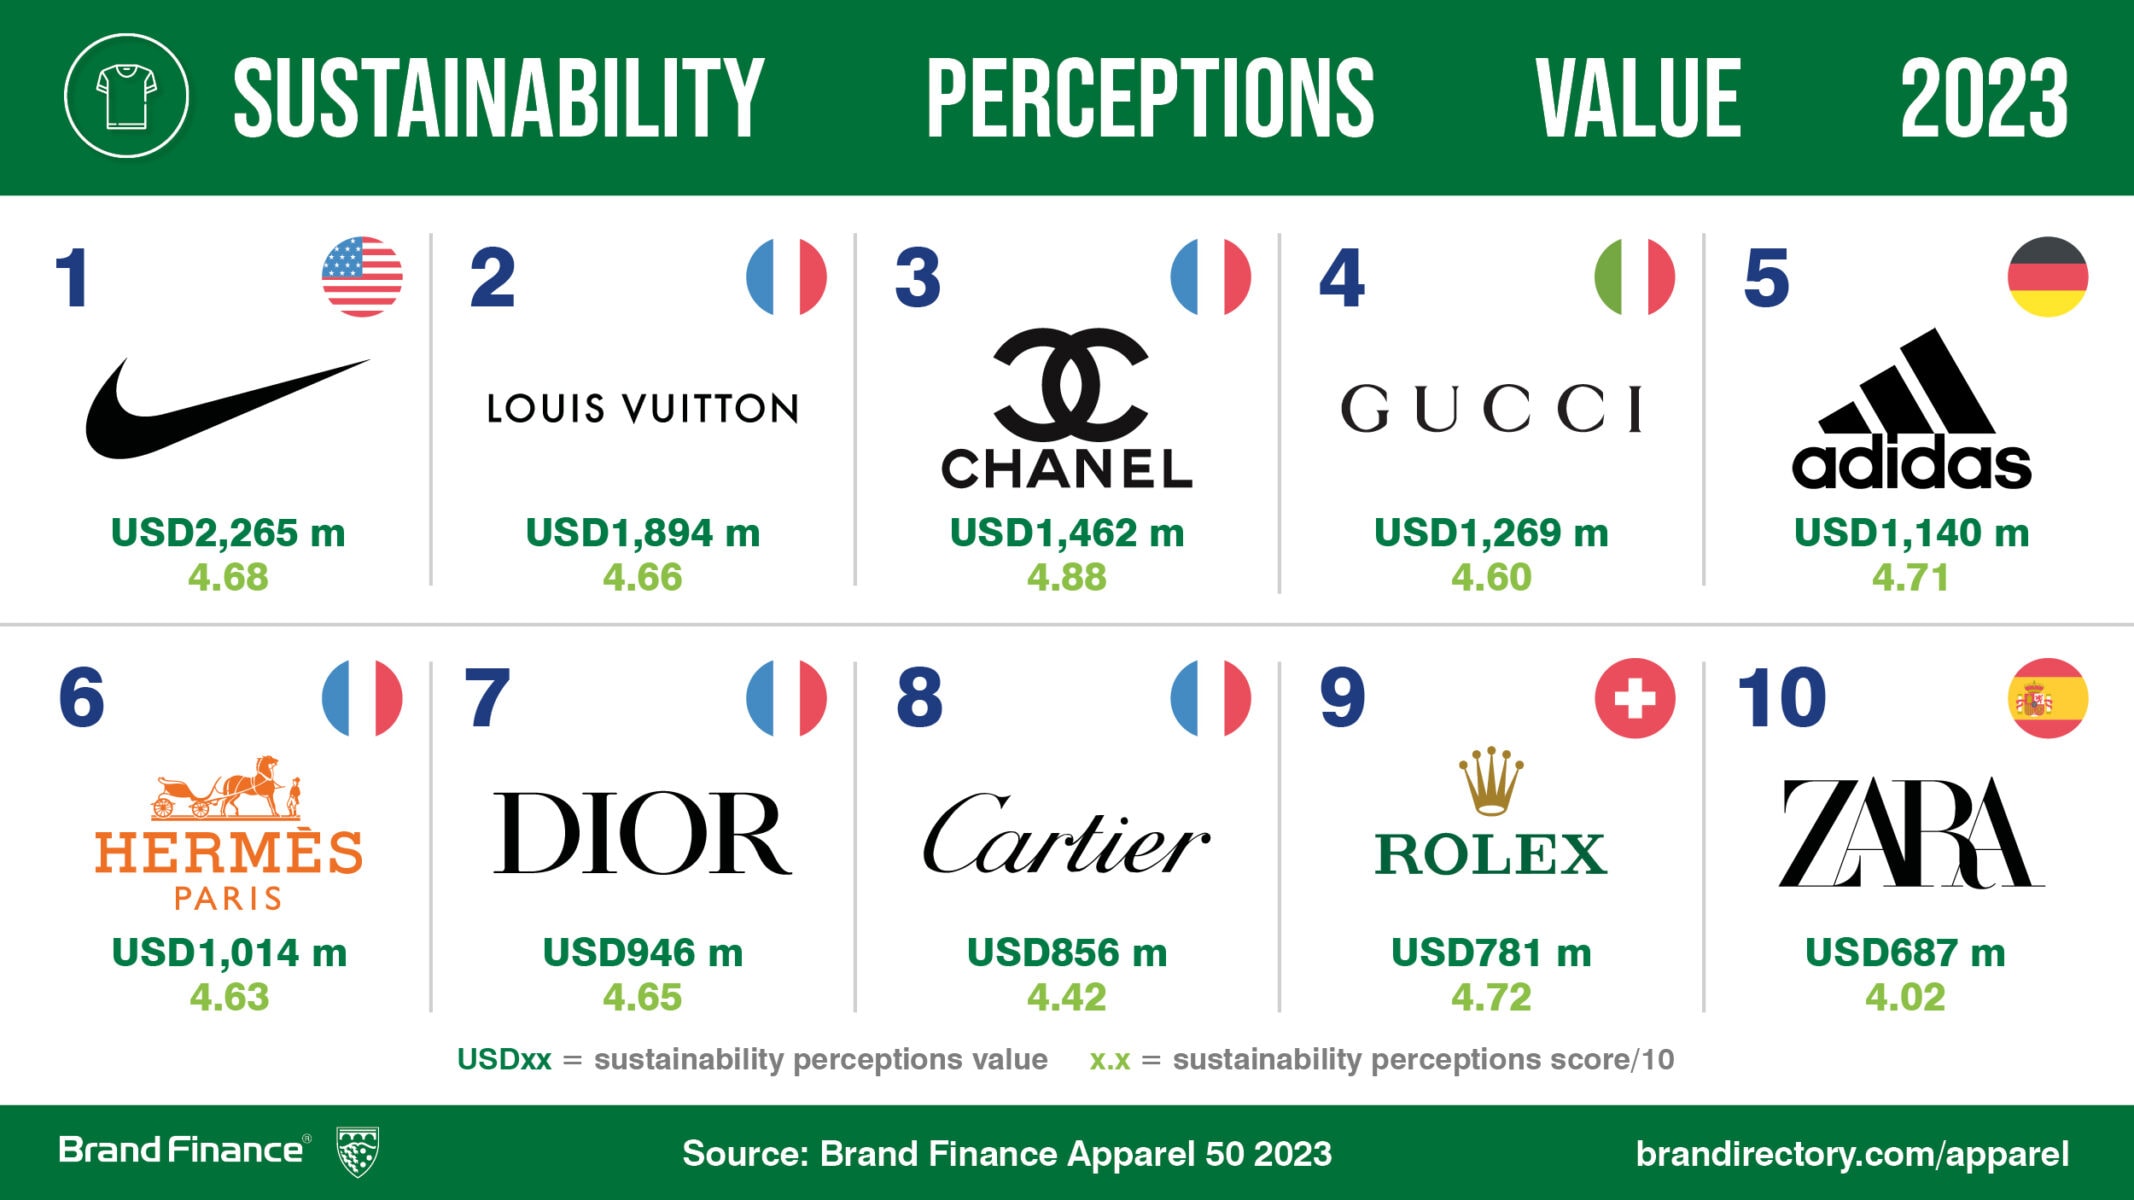 Louis Vuitton is crowned the world's most valuable luxury fashion brand